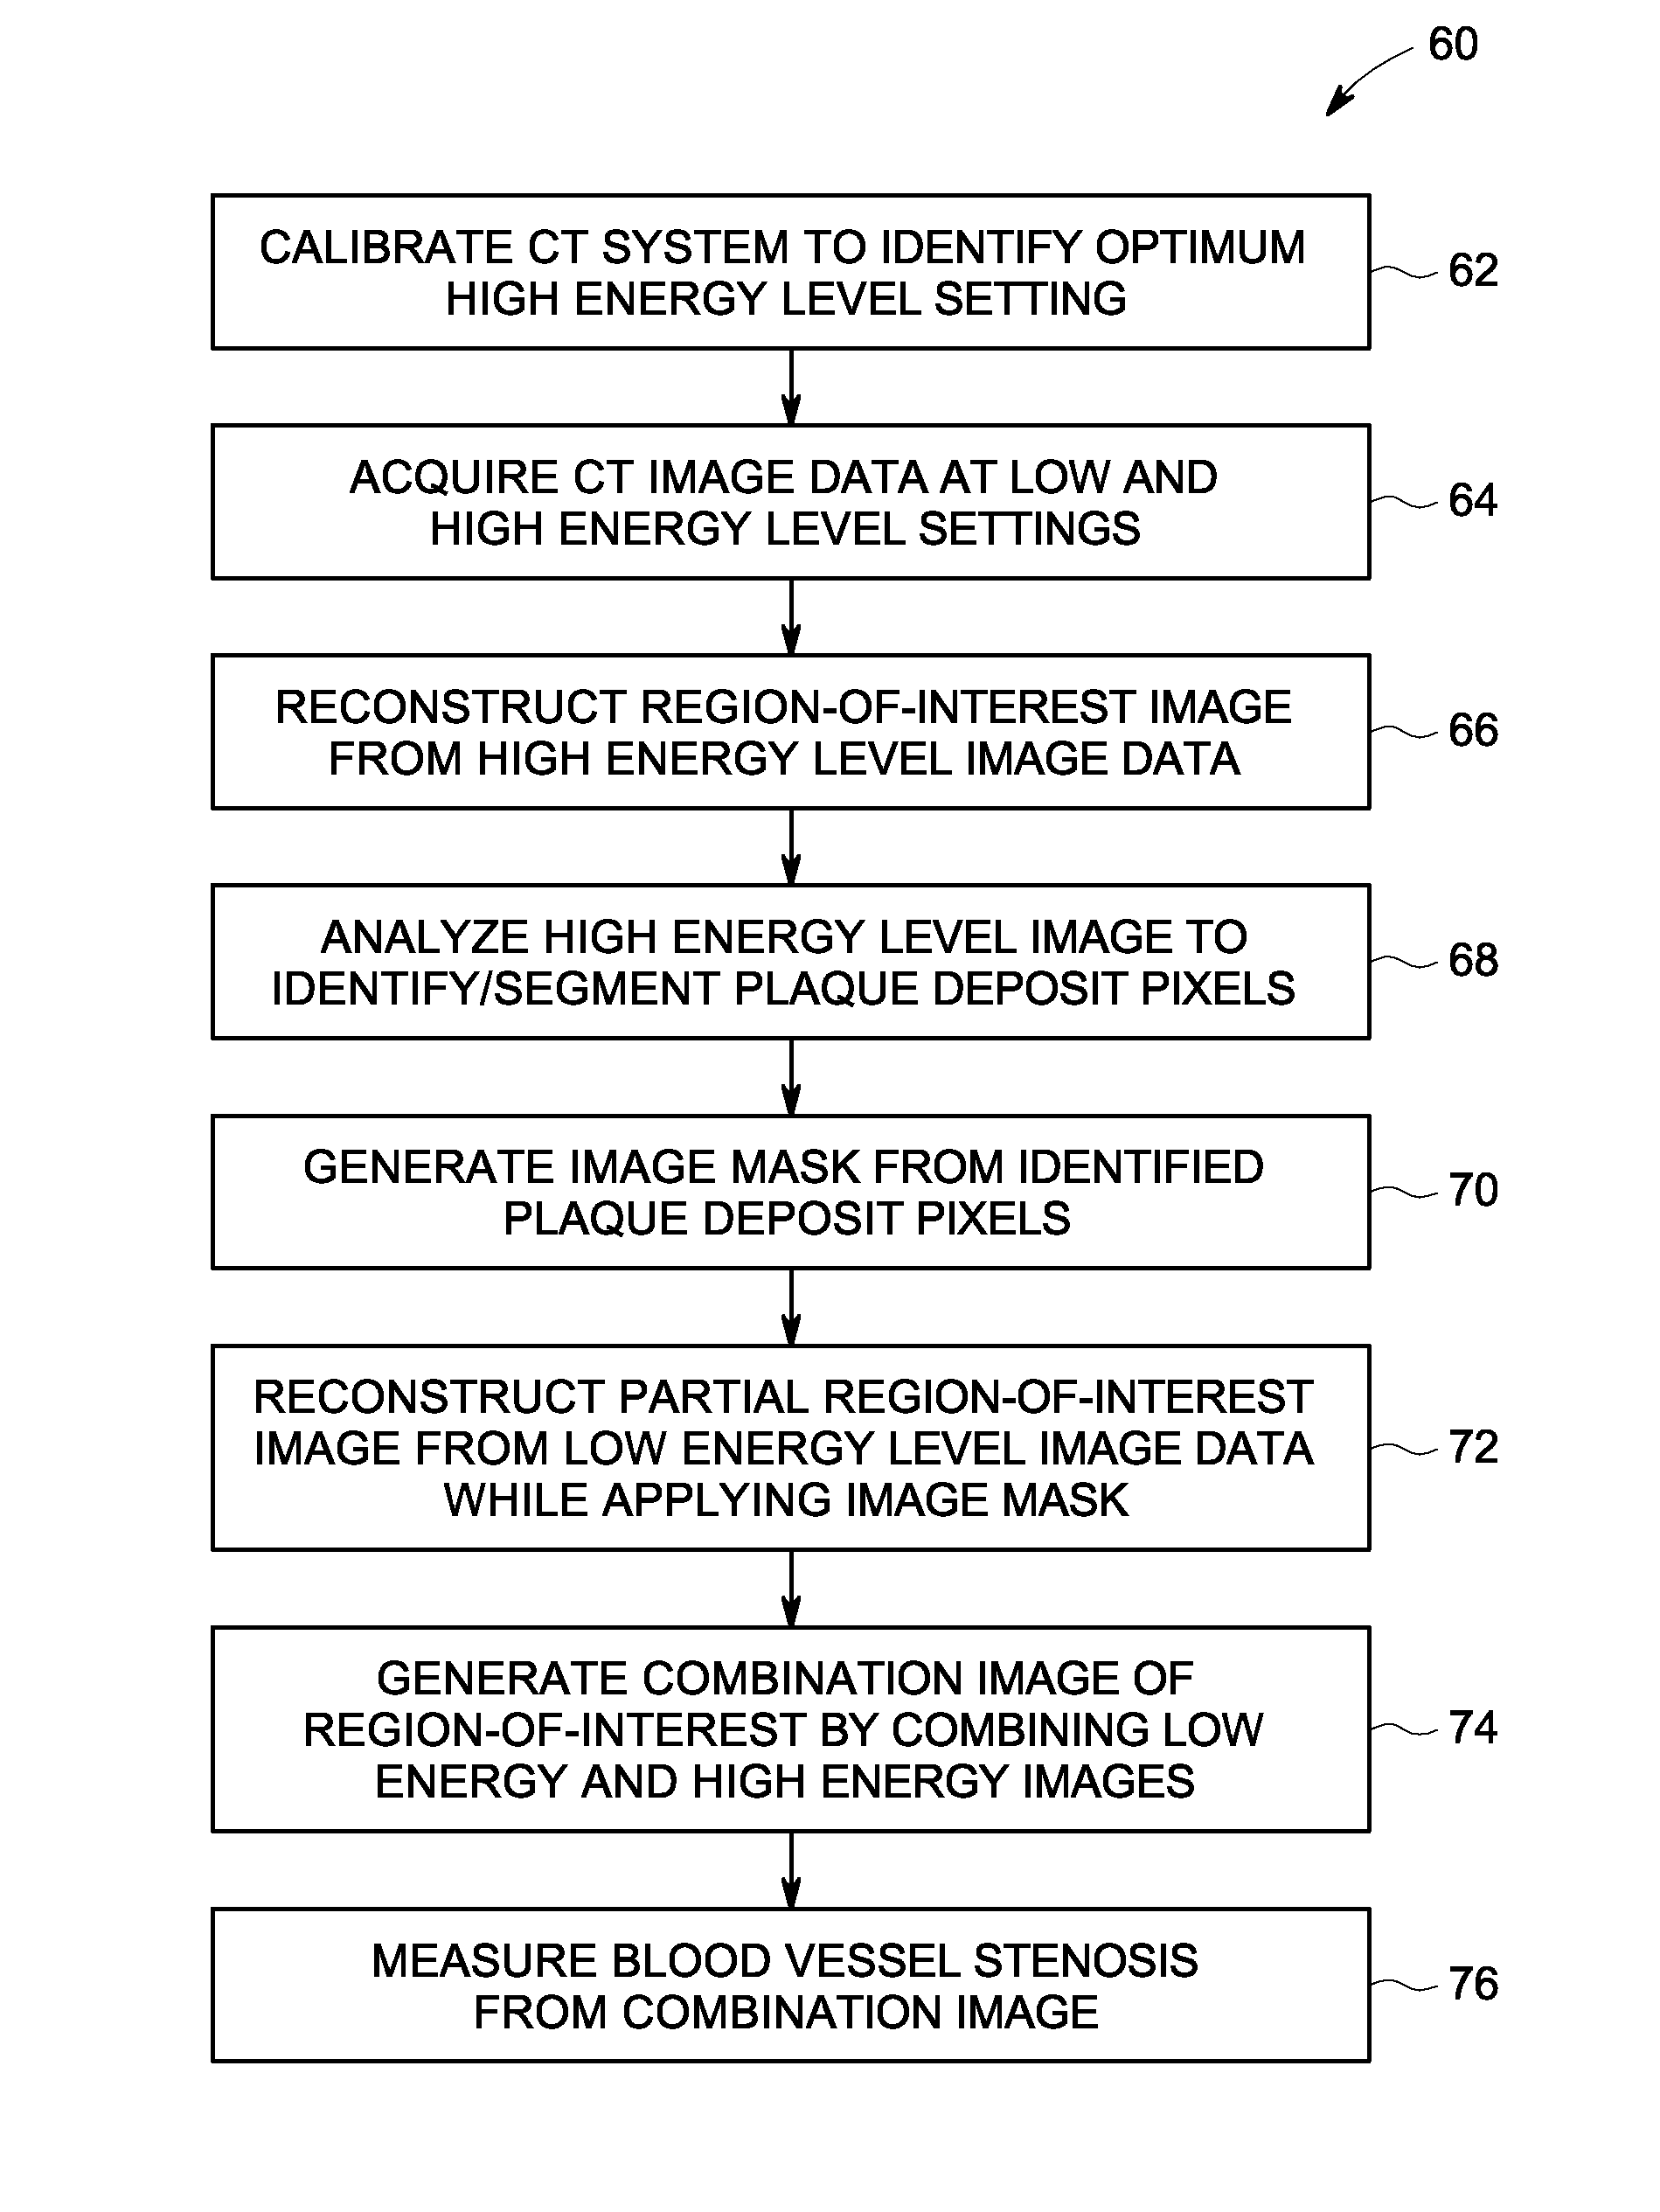 System and method for blood vessel stenosis visualization and quantification using spectral CT analysis